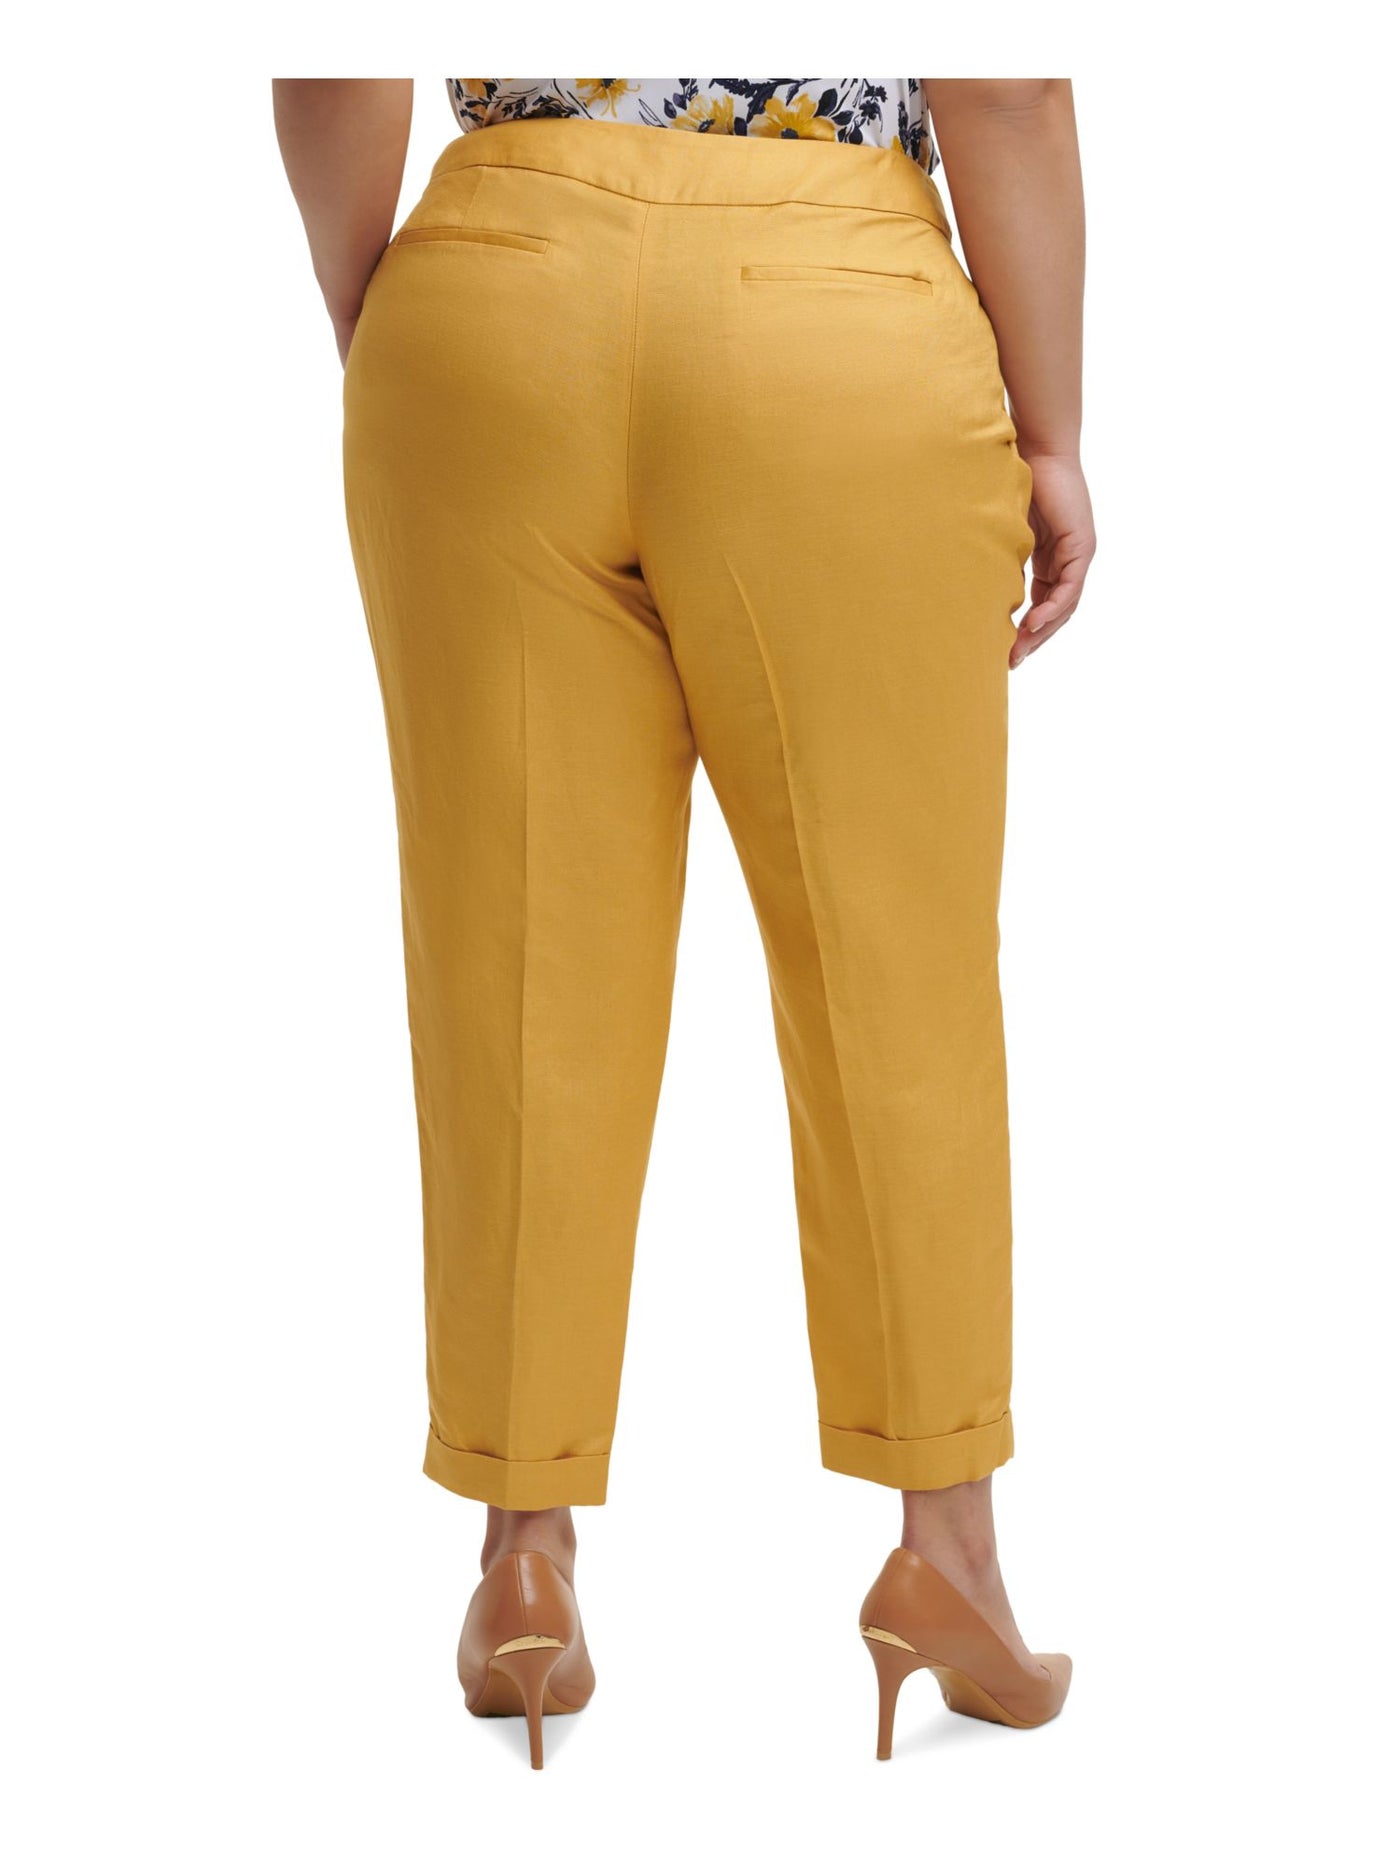 CALVIN KLEIN Womens Yellow Zippered Pocketed Creased Pleated Wear To Work Cuffed Pants Plus 20W